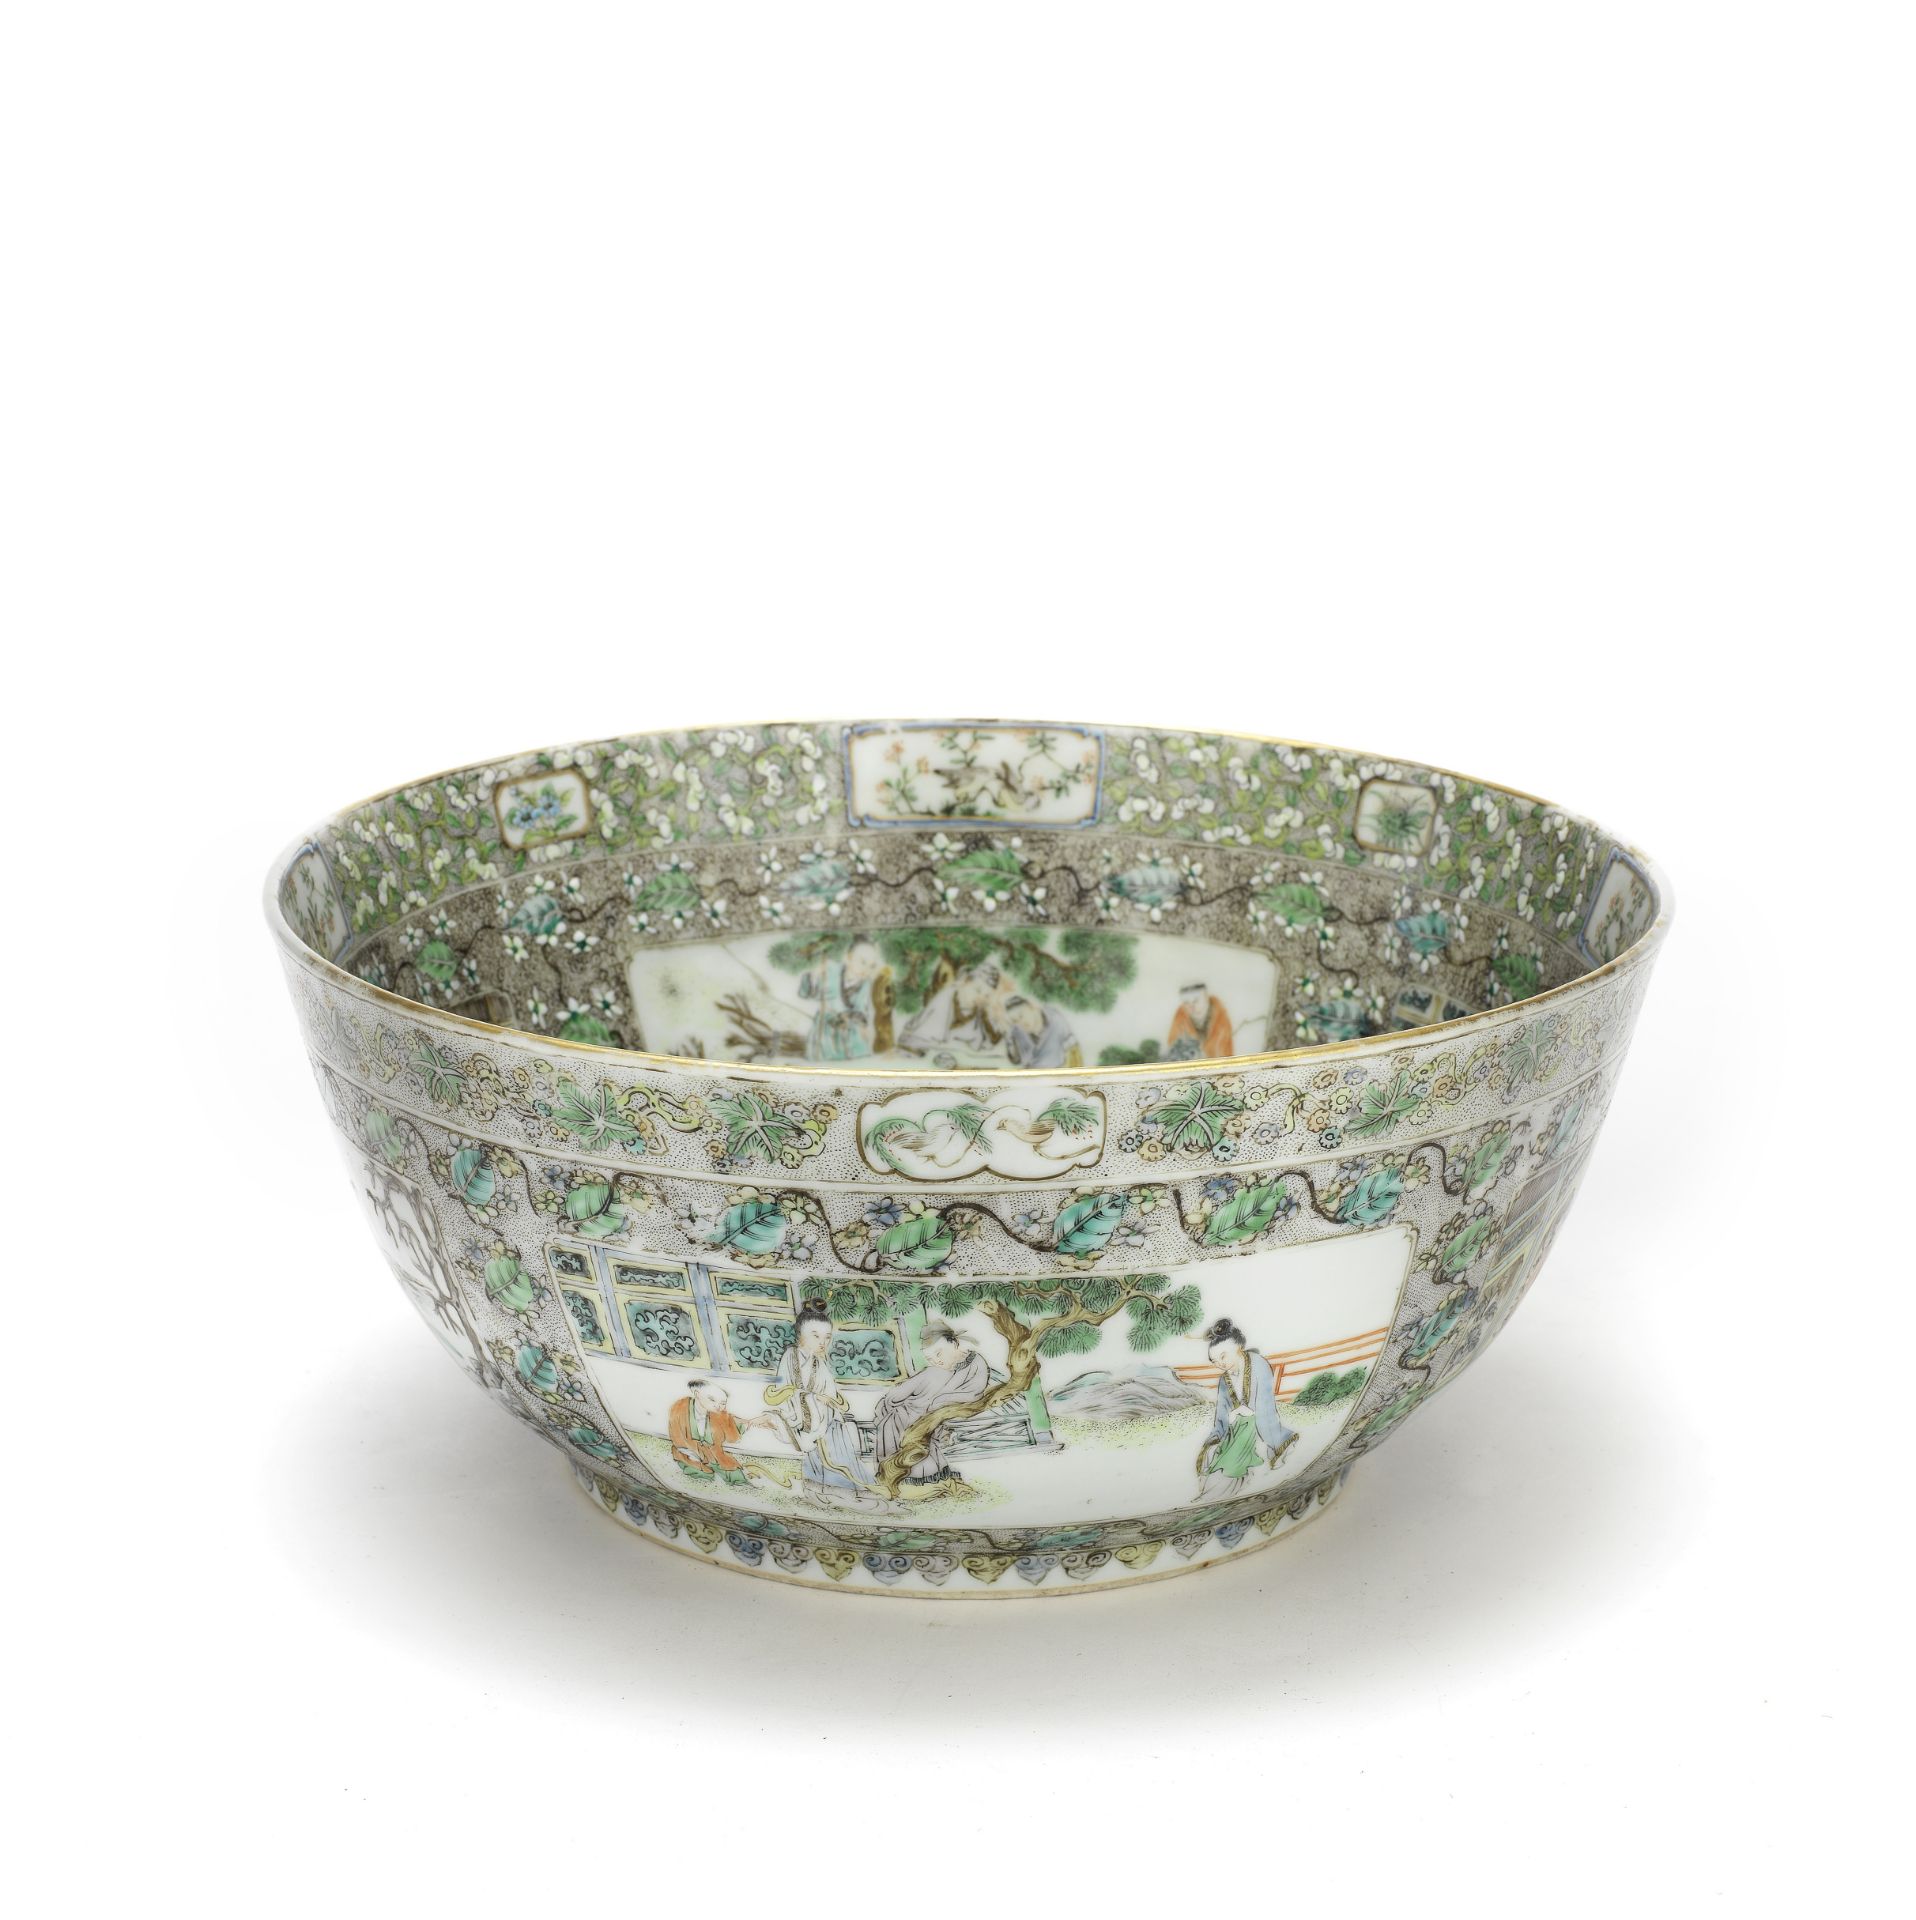 A FAMILLE VERTE PUNCH BOWL Late 19th century